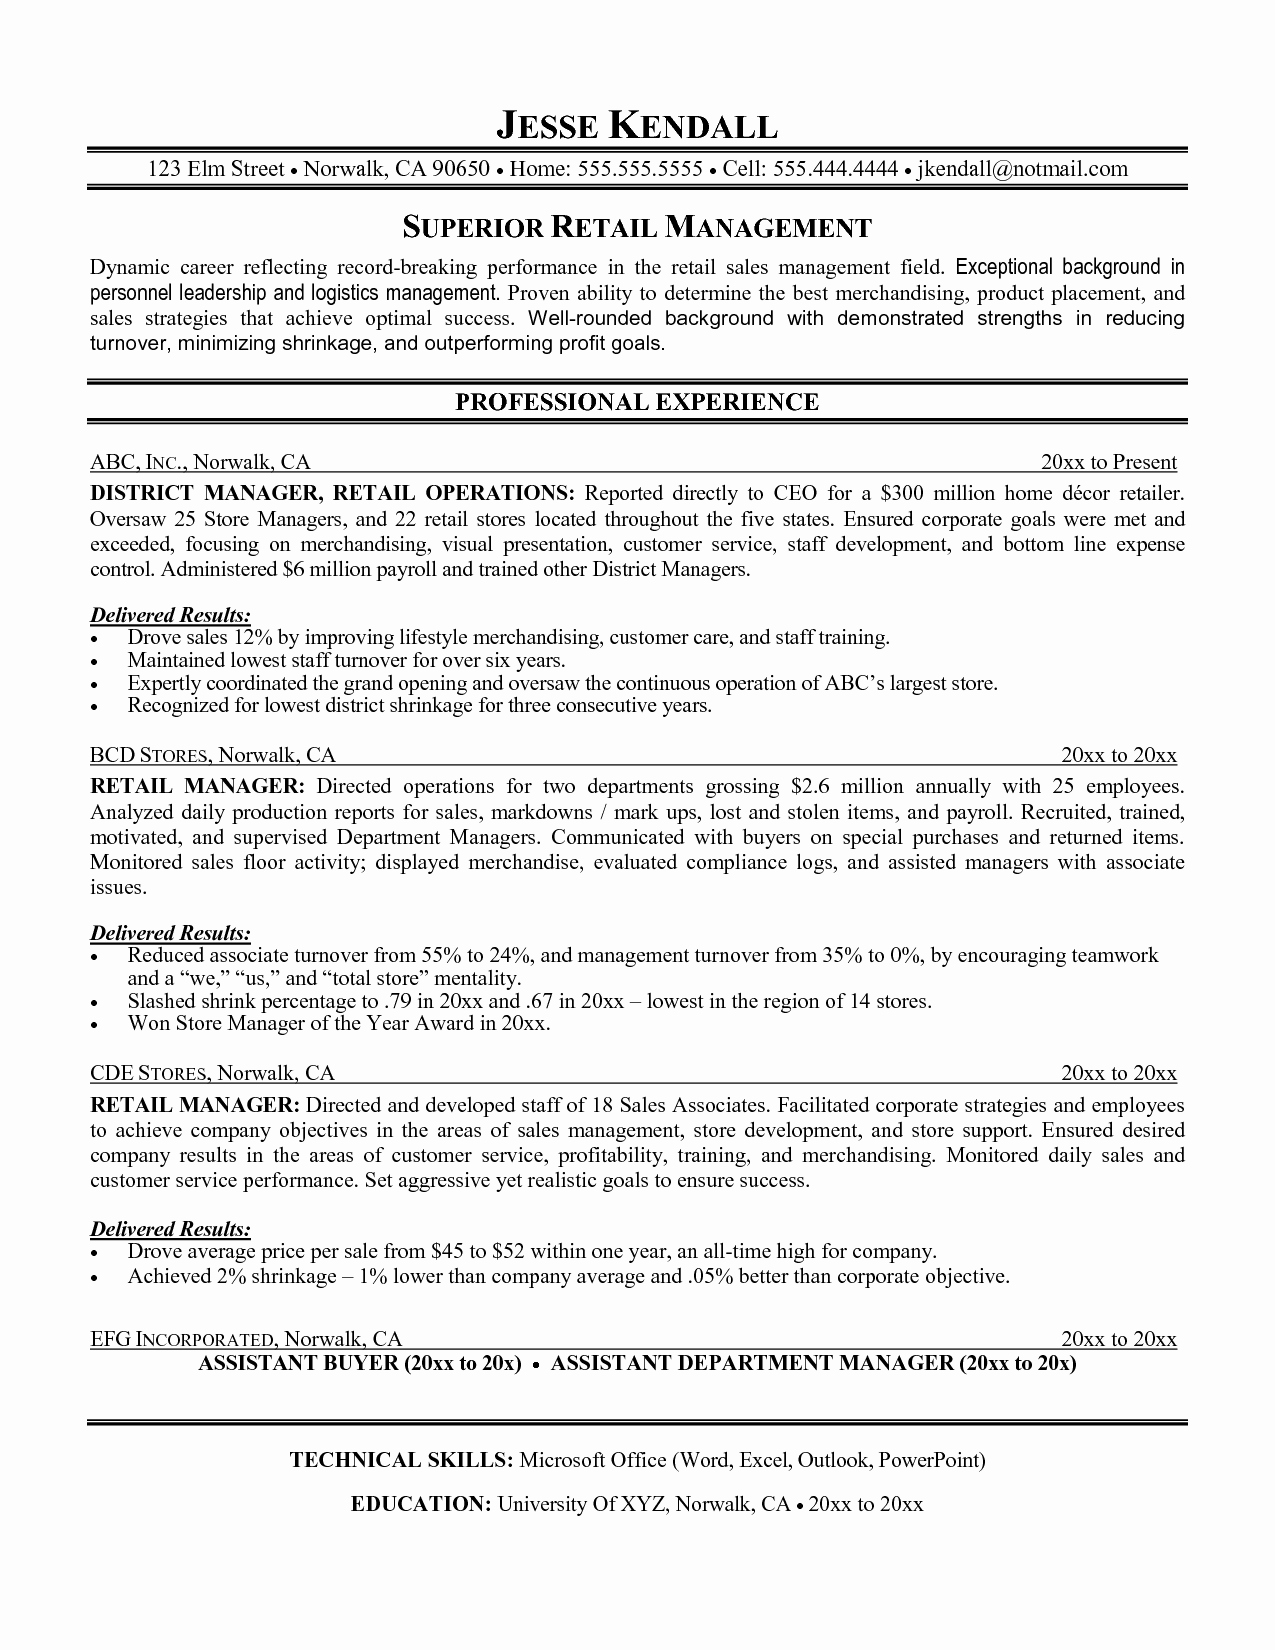 Retail Management Resume Examples Retail Resume Objective